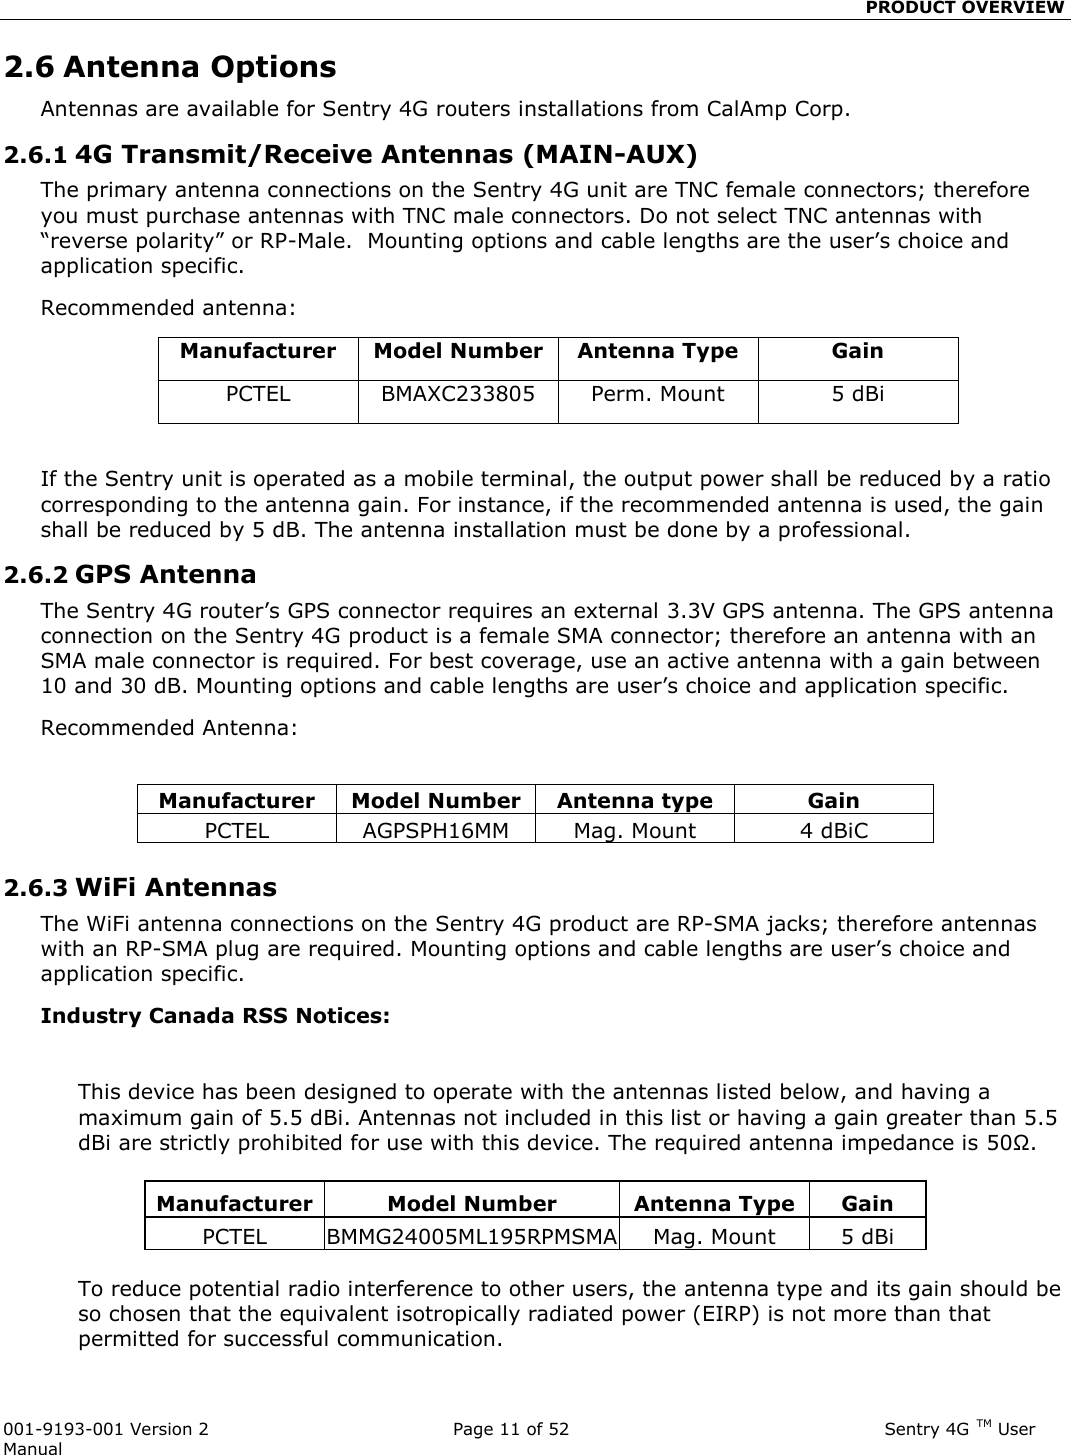                                                 PRODUCT OVERVIEW  001-9193-001 Version 2              Page 11 of 52                              Sentry 4G TM User Manual 2.6 Antenna Options Antennas are available for Sentry 4G routers installations from CalAmp Corp.  2.6.1 4G Transmit/Receive Antennas (MAIN-AUX) The primary antenna connections on the Sentry 4G unit are TNC female connectors; therefore you must purchase antennas with TNC male connectors. Do not select TNC antennas with “reverse polarity” or RP-Male.  Mounting options and cable lengths are the user’s choice and application specific.   Recommended antenna: Manufacturer Model Number Antenna Type Gain PCTEL BMAXC233805 Perm. Mount 5 dBi  If the Sentry unit is operated as a mobile terminal, the output power shall be reduced by a ratio corresponding to the antenna gain. For instance, if the recommended antenna is used, the gain shall be reduced by 5 dB. The antenna installation must be done by a professional. 2.6.2 GPS Antenna The Sentry 4G router’s GPS connector requires an external 3.3V GPS antenna. The GPS antenna connection on the Sentry 4G product is a female SMA connector; therefore an antenna with an SMA male connector is required. For best coverage, use an active antenna with a gain between 10 and 30 dB. Mounting options and cable lengths are user’s choice and application specific. Recommended Antenna:   2.6.3 WiFi Antennas The WiFi antenna connections on the Sentry 4G product are RP-SMA jacks; therefore antennas with an RP-SMA plug are required. Mounting options and cable lengths are user’s choice and application specific. Industry Canada RSS Notices:    This device has been designed to operate with the antennas listed below, and having a maximum gain of 5.5 dBi. Antennas not included in this list or having a gain greater than 5.5 dBi are strictly prohibited for use with this device. The required antenna impedance is 50Ω.  Manufacturer Model Number Antenna Type  Gain PCTEL BMMG24005ML195RPMSMA Mag. Mount 5 dBi  To reduce potential radio interference to other users, the antenna type and its gain should be so chosen that the equivalent isotropically radiated power (EIRP) is not more than that permitted for successful communication. Manufacturer Model Number Antenna type Gain PCTEL AGPSPH16MM Mag. Mount 4 dBiC 